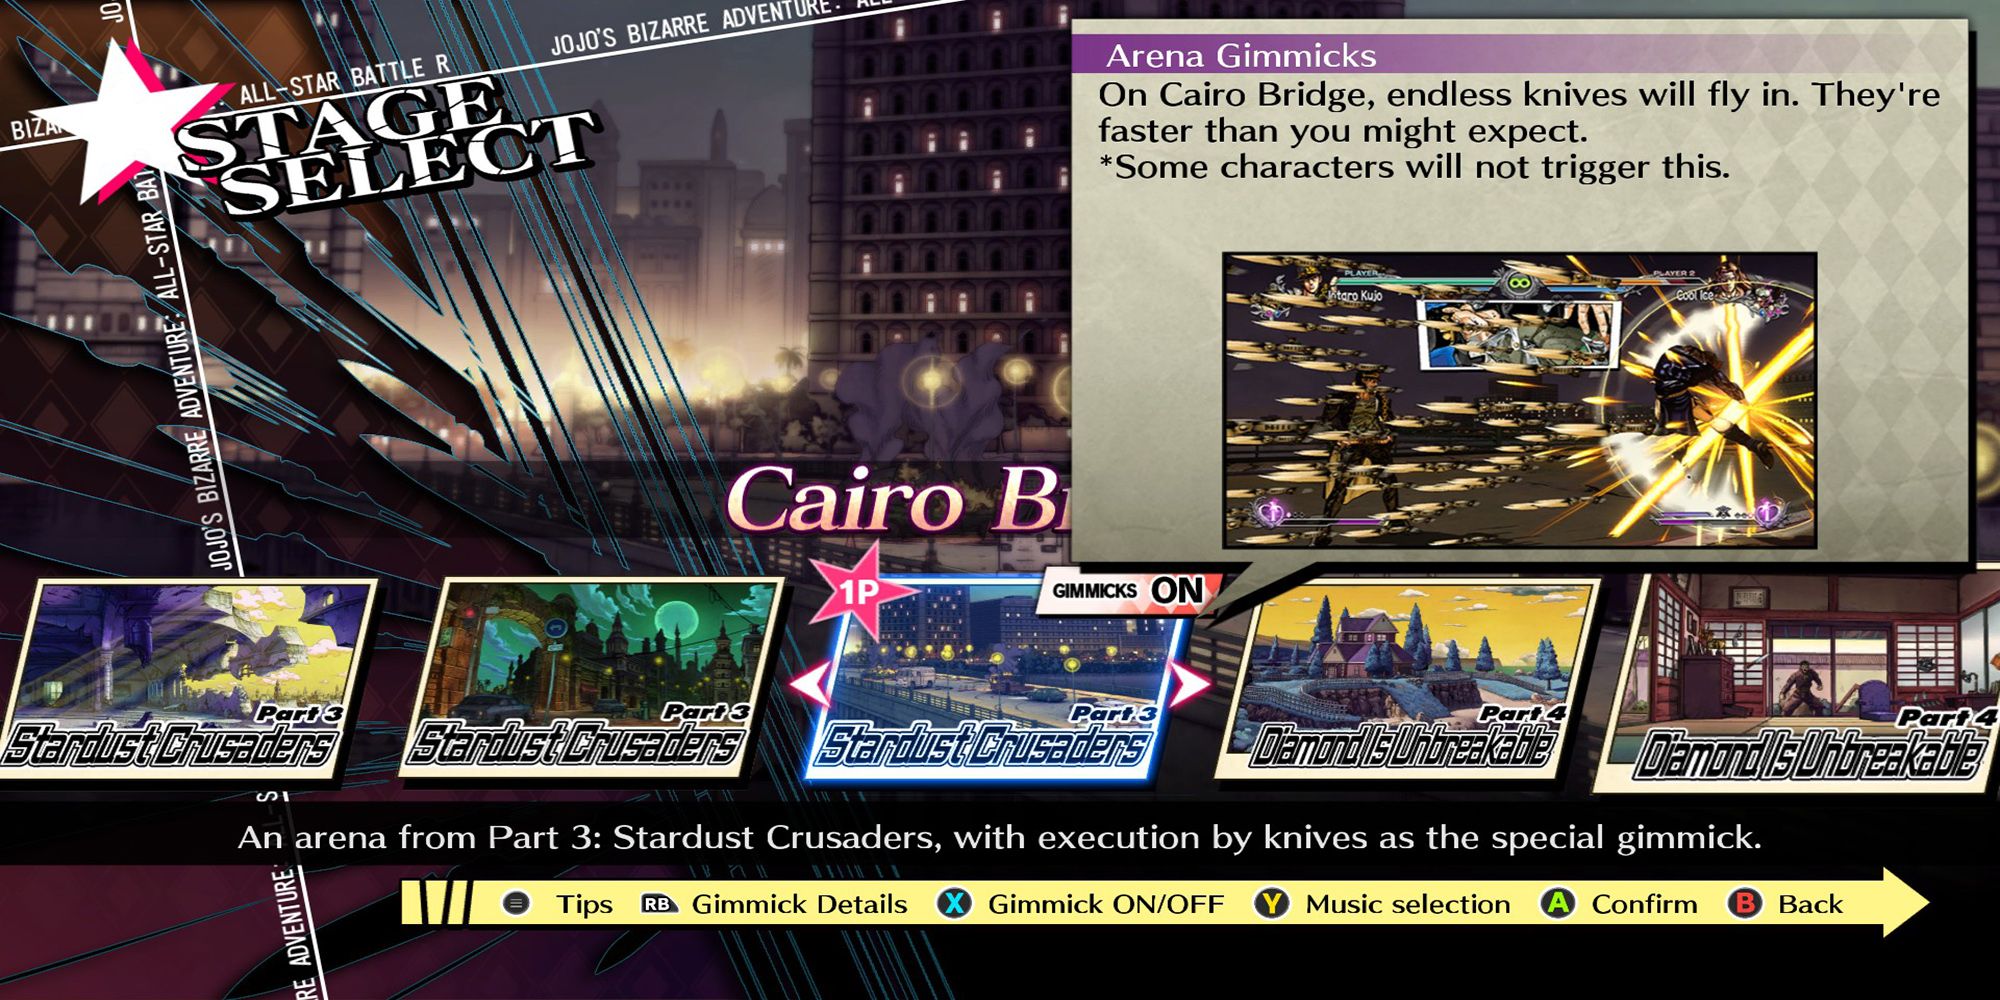 In JoJo's Bizarre Adventure: ASBR, Cairo Bridge's arena gimmick is an assault of hundreds of knives thrown by DIO.